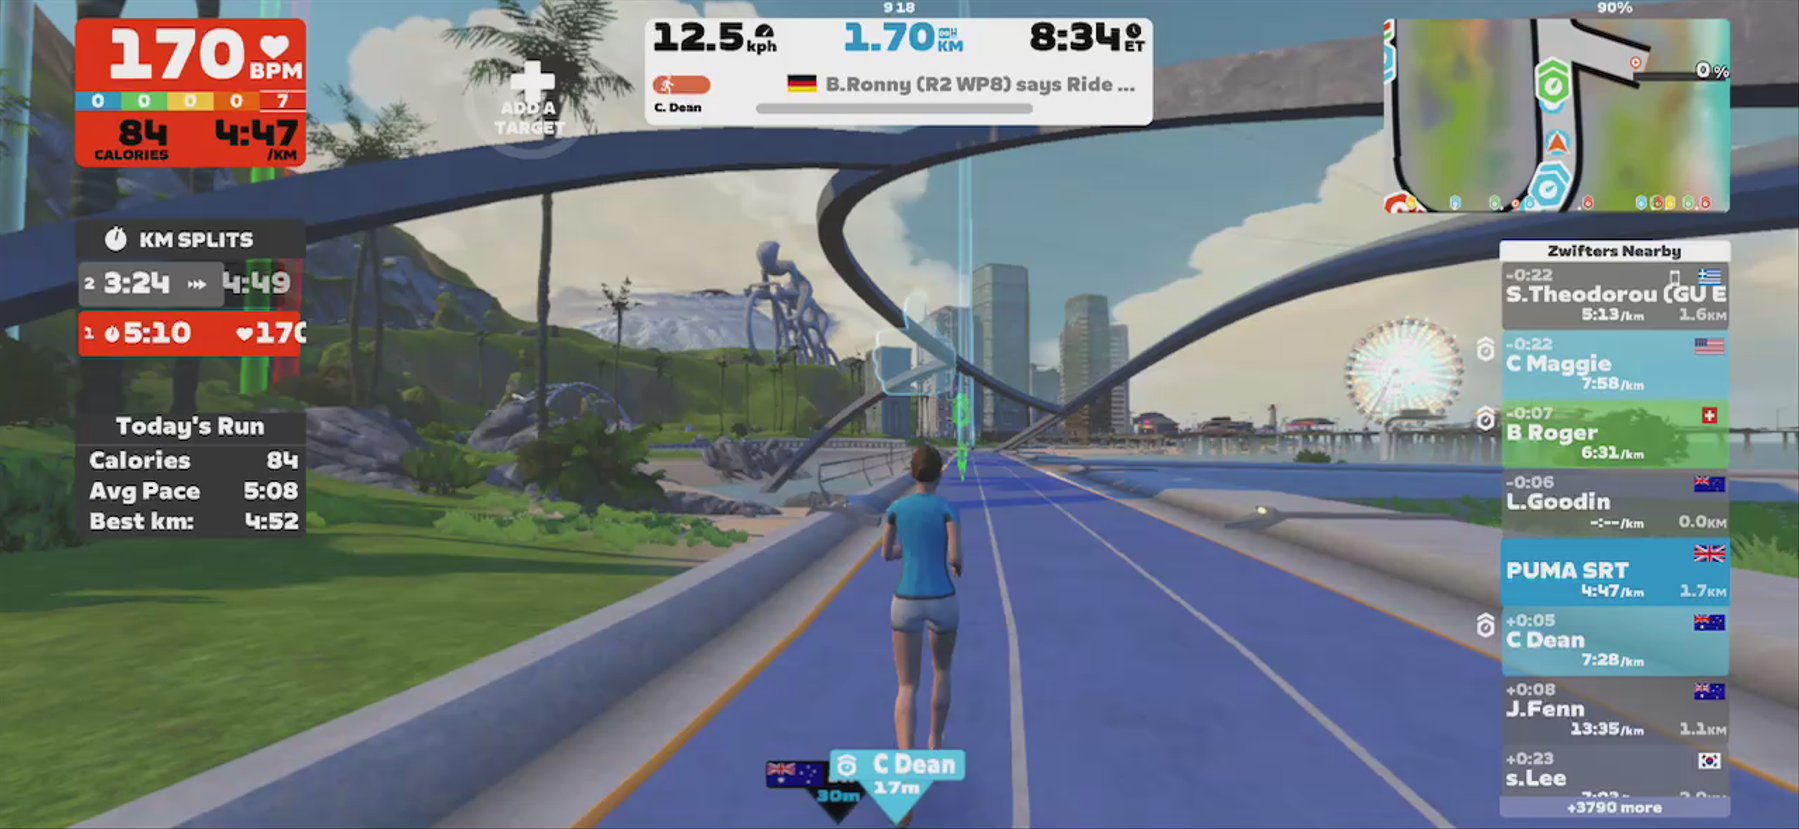 Zwift - Pacer Group Run: May Field in Watopia with Roger